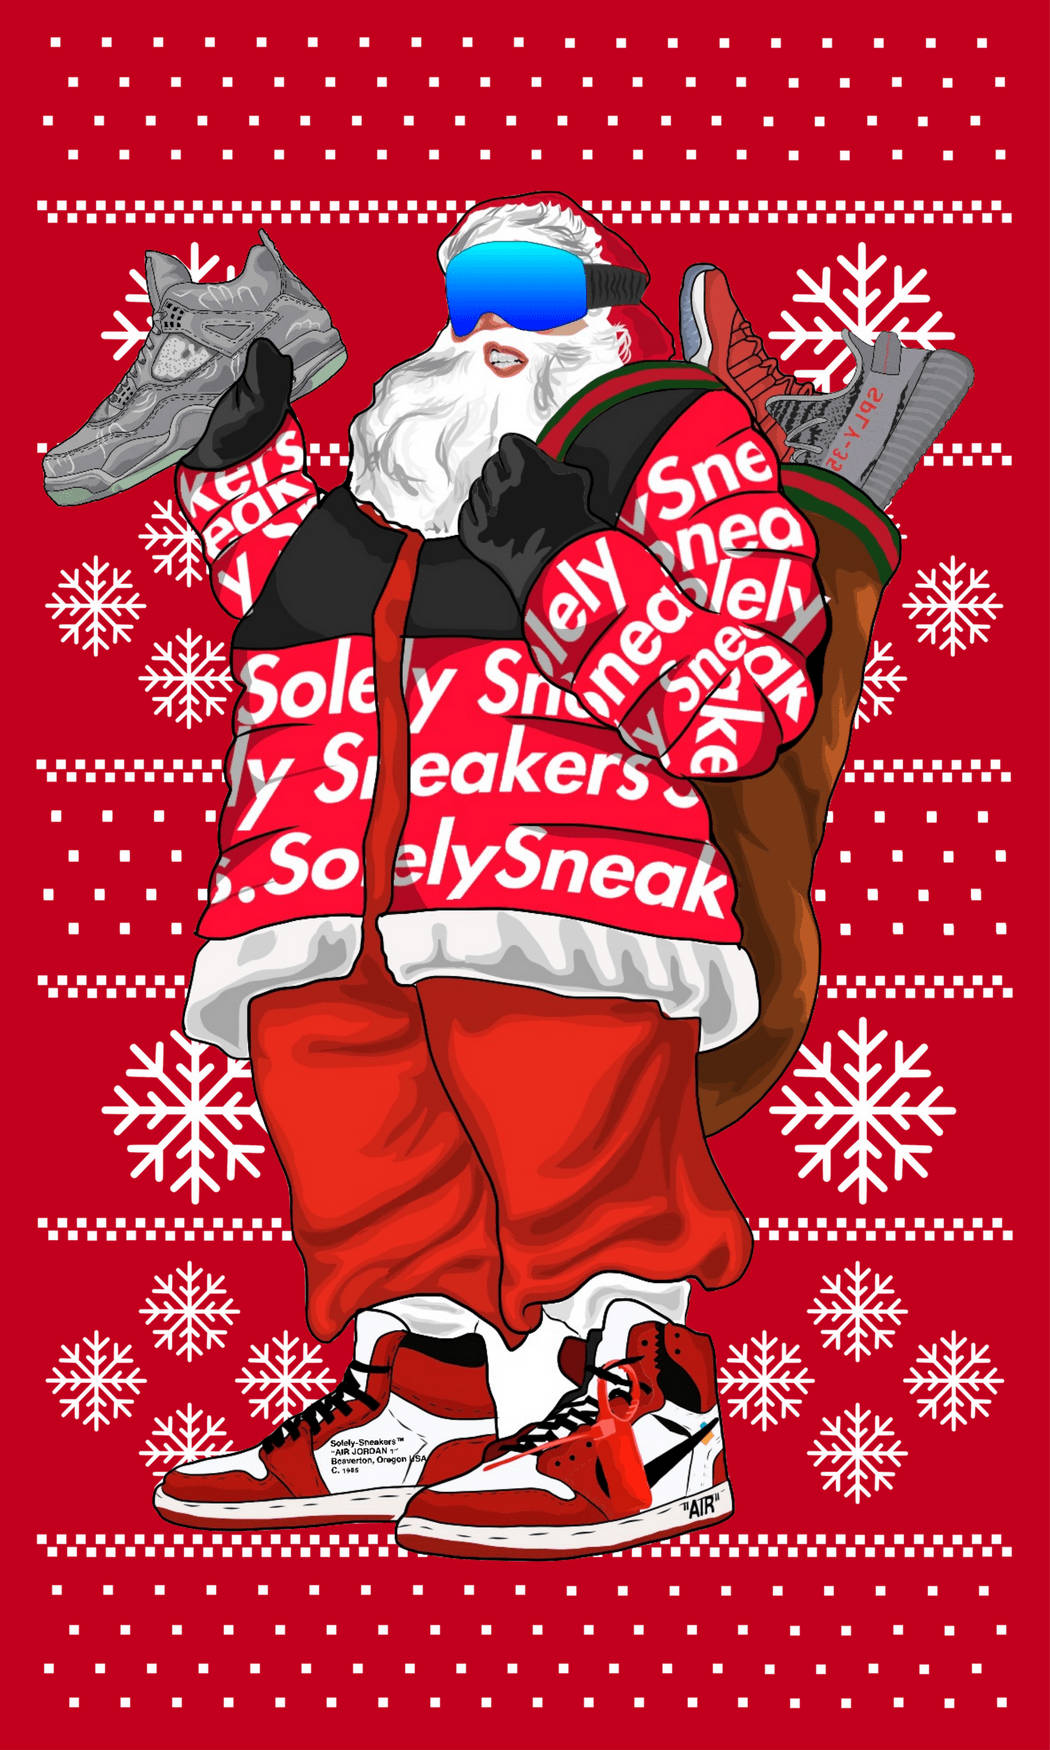 Feel the spirit of the holidays with this festive Hypebeast Santa. Wallpaper